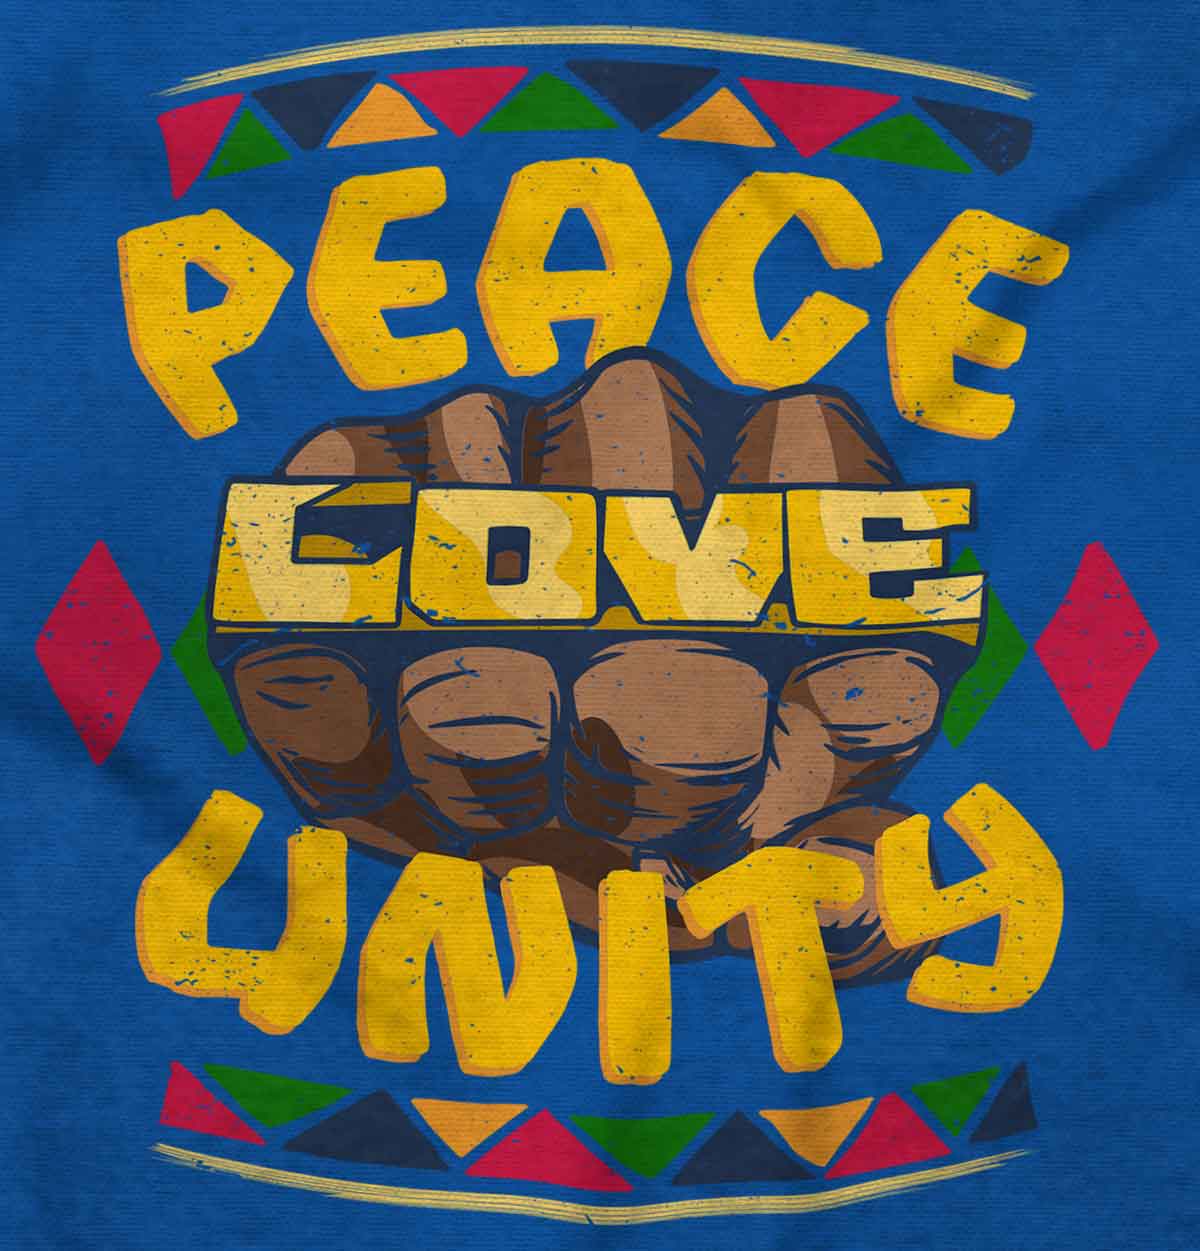 A lively fabric design with a Caribbean influence that embodies love, peace, and unity and promotes embracing love and unity in a world that needs it, symbolizing harmony and the vibrant vibes of hip-hop culture.